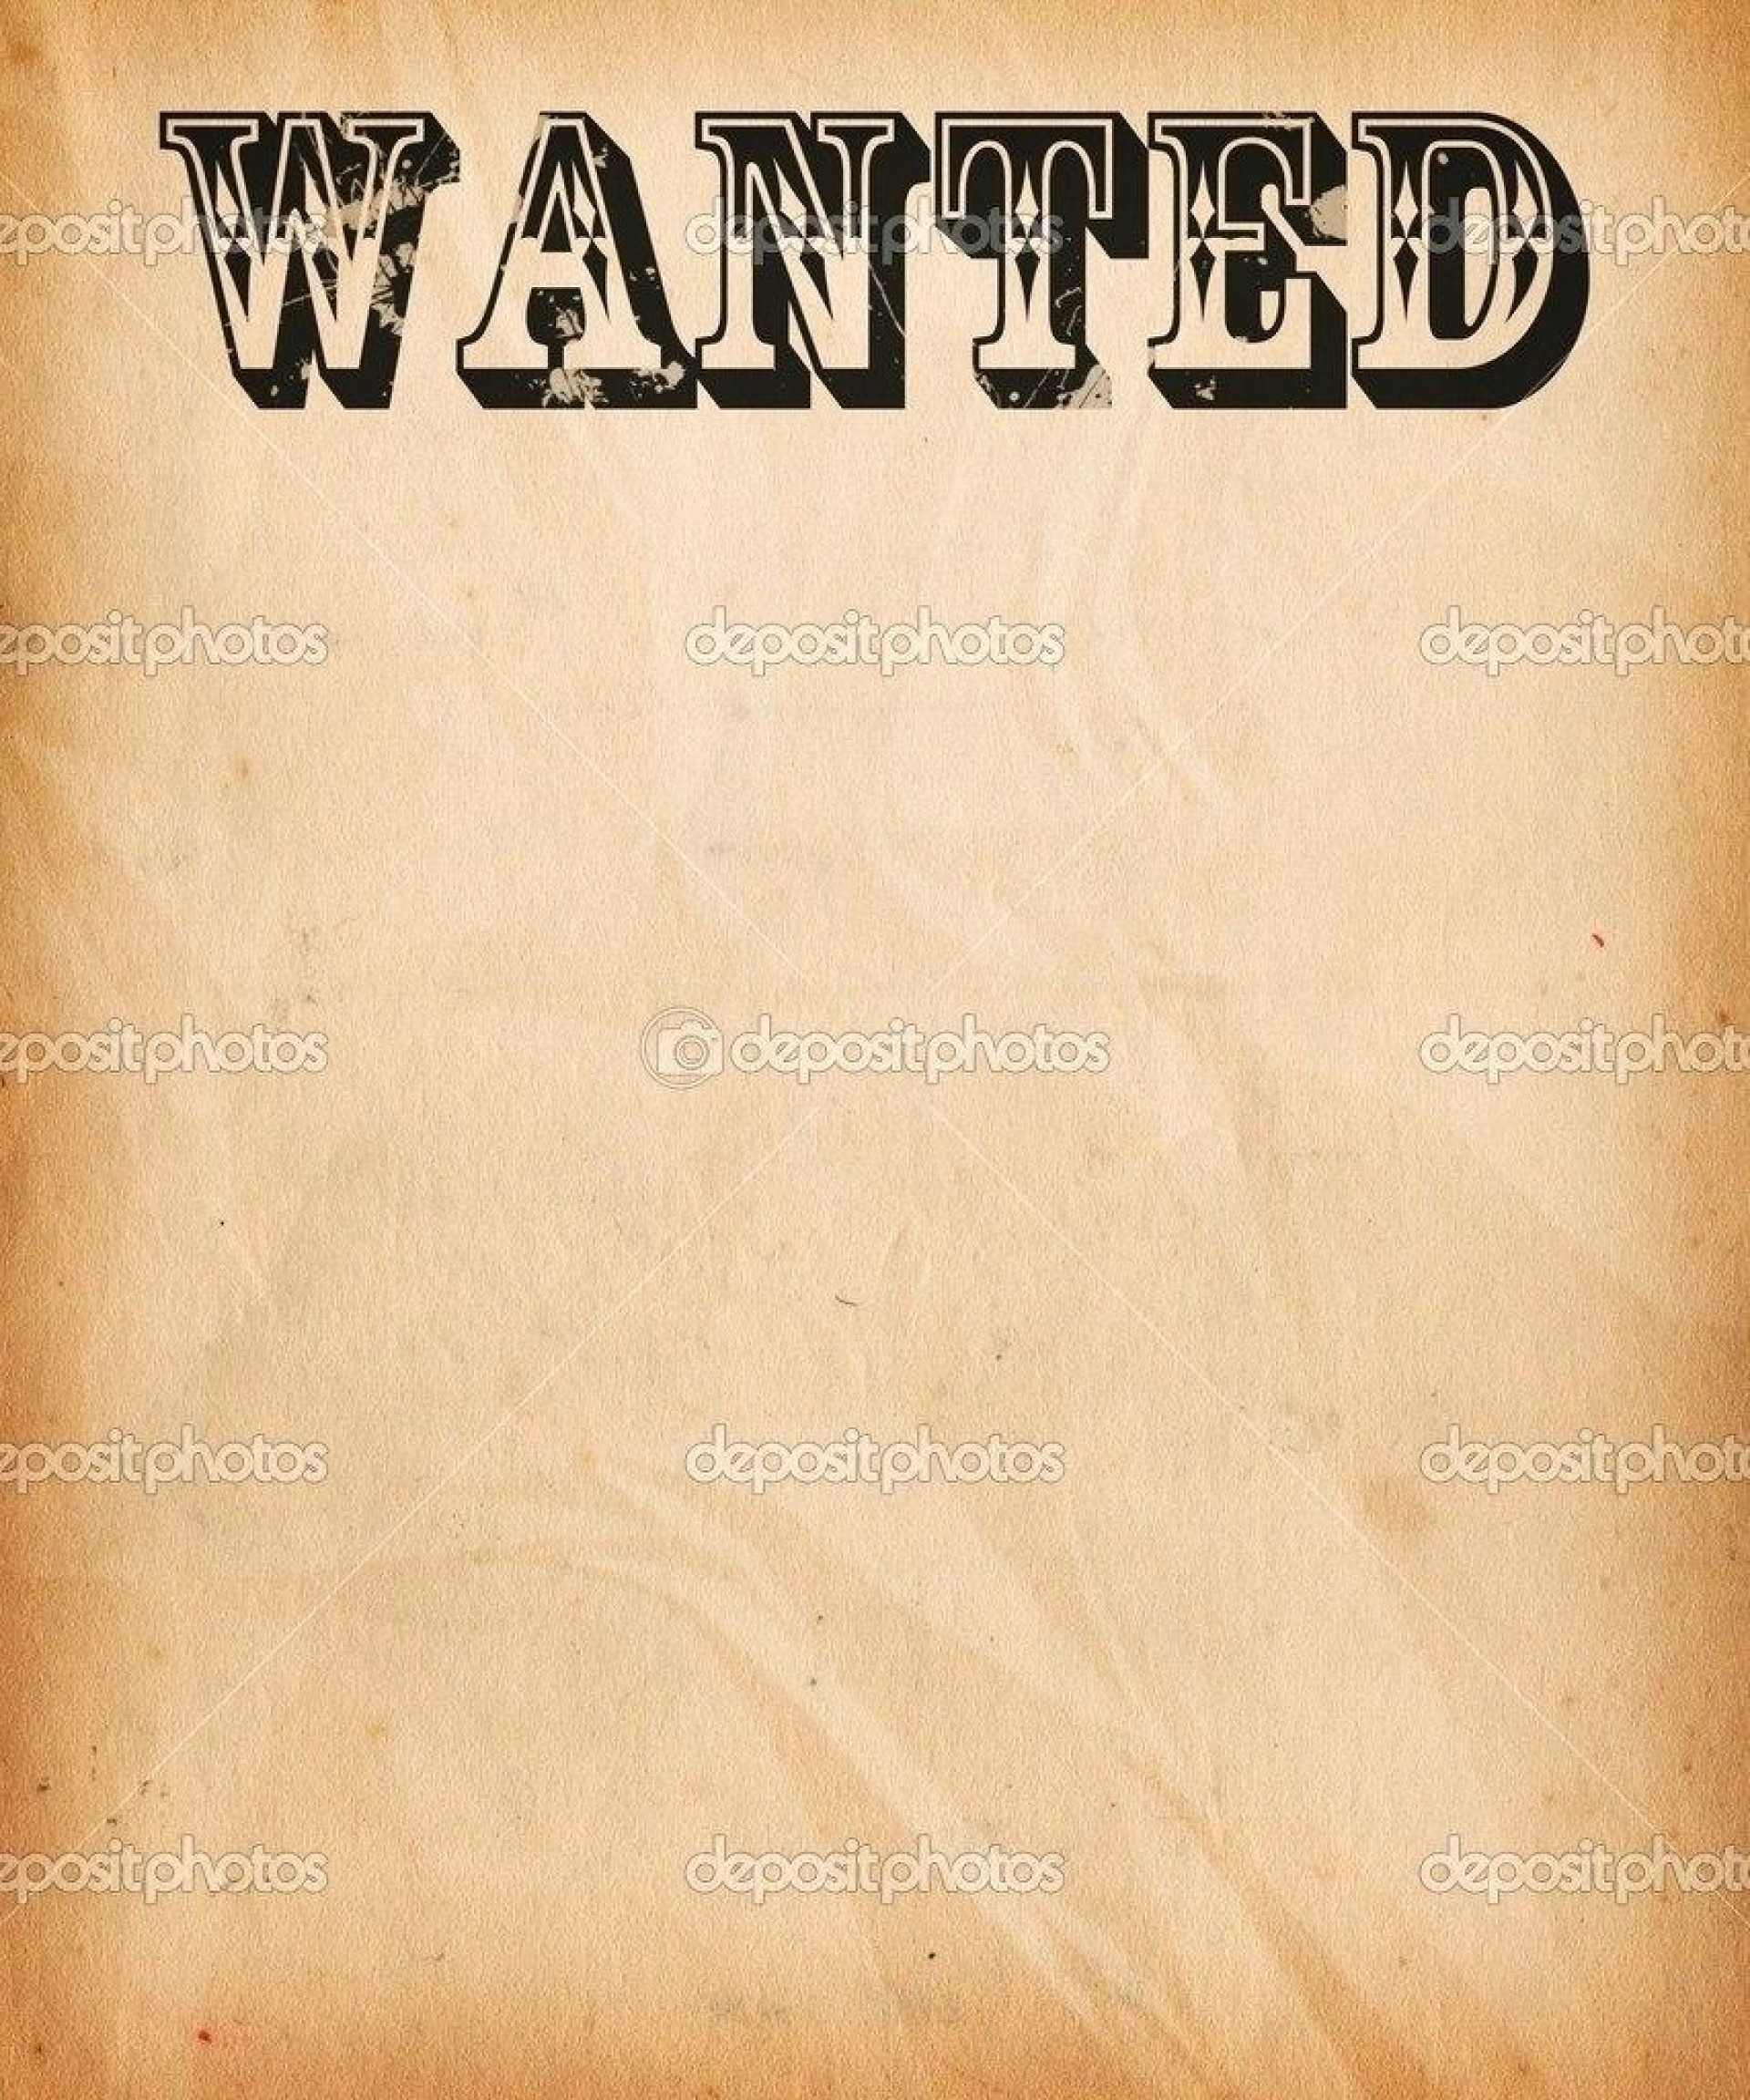 014 Free Wanted Poster Template Printable Lovely Invitation Flyer - Wanted Poster Printable Free